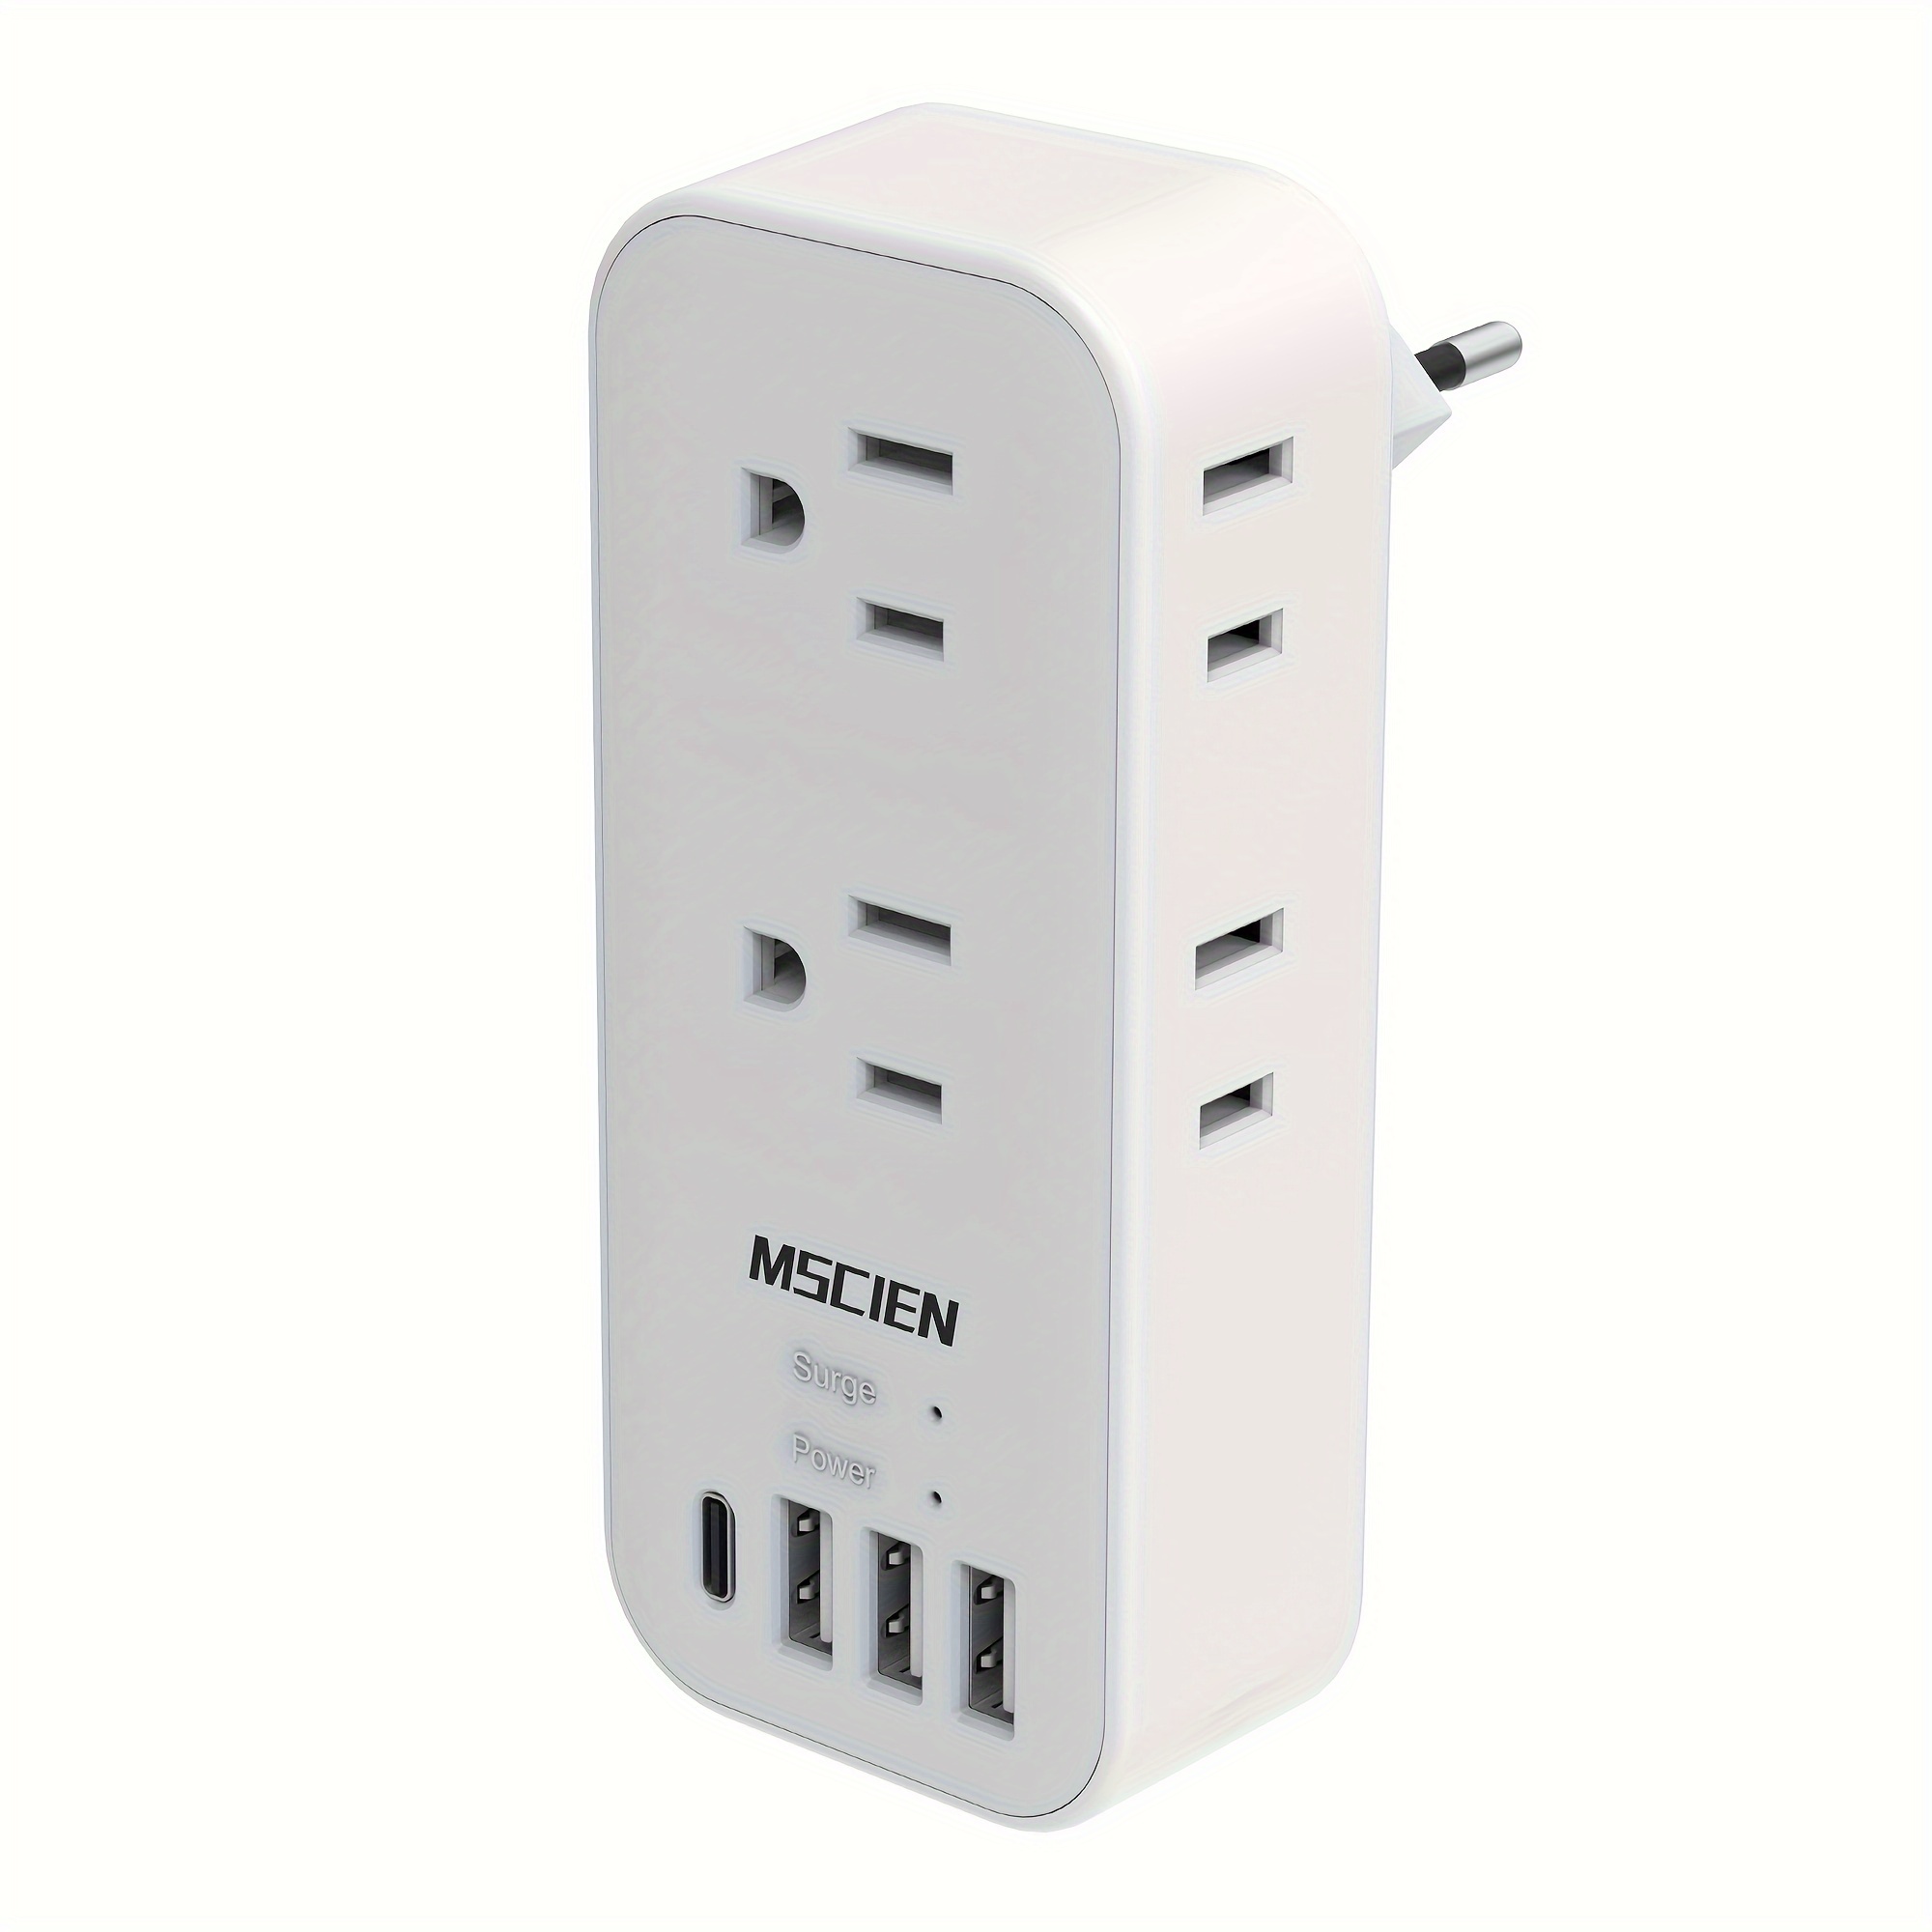 

European Travel Plug Adapter, International Power Plug Adapter With 6 Outlet 4 Usb (1 Usb C), Type C Plug Adapter Travel Essentials To Most Europe Eu Italy Spain France Germany Switzerland Portugal